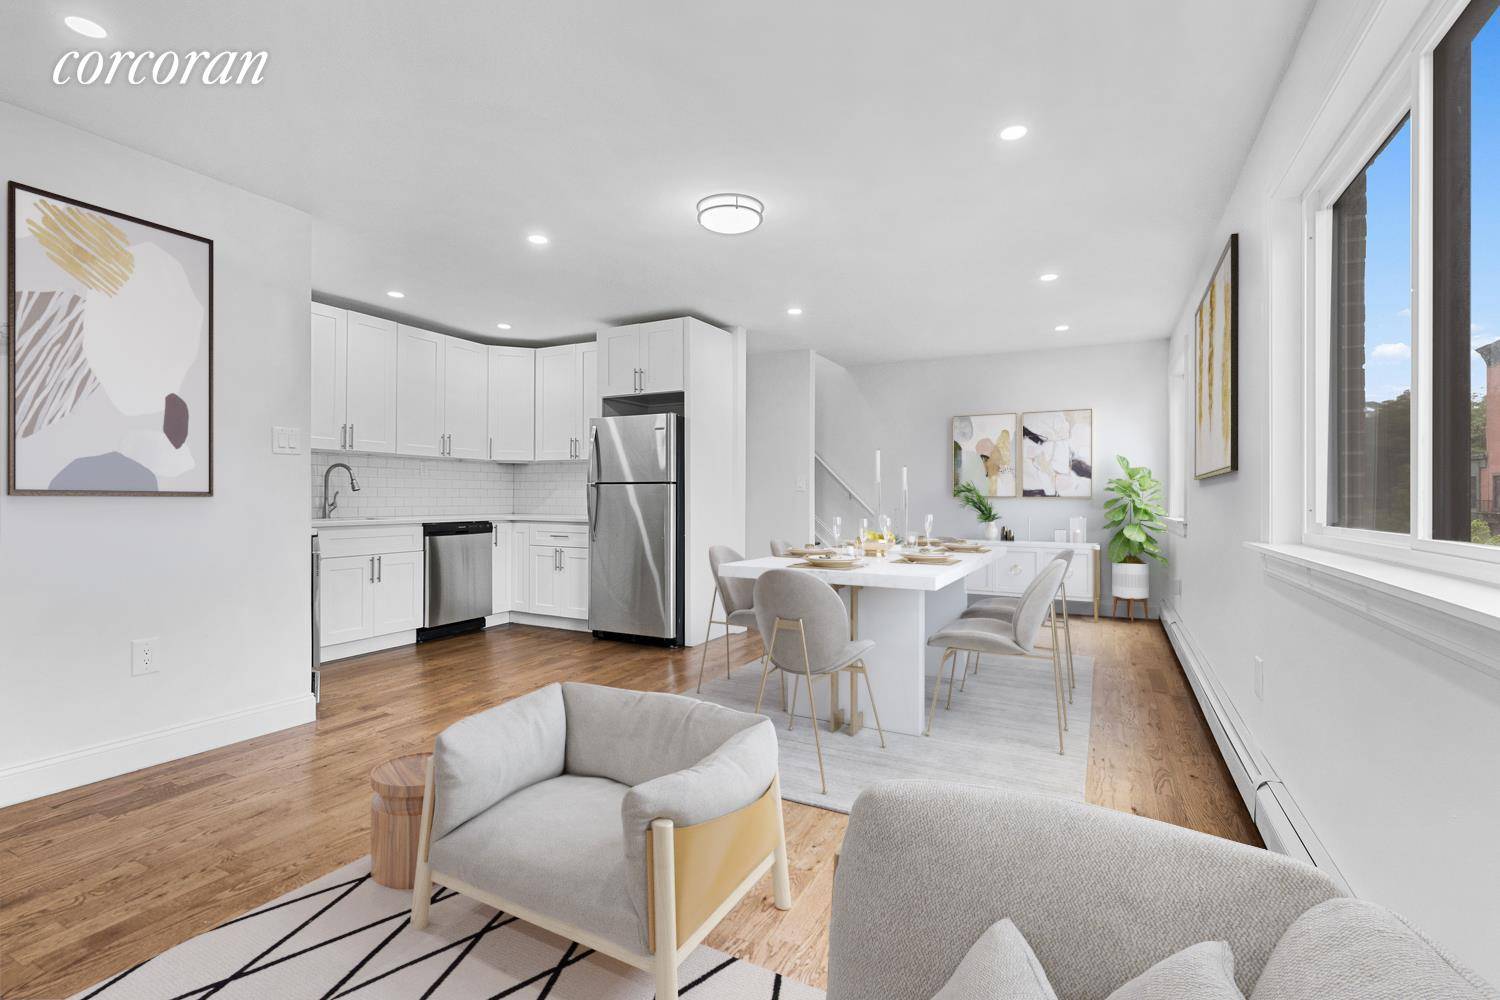 Introducing 279 Lexington Avenue, APT 1 ; a renovated lower duplex with huge finished basement and patio space in the heart of Bedford Stuyvesant.